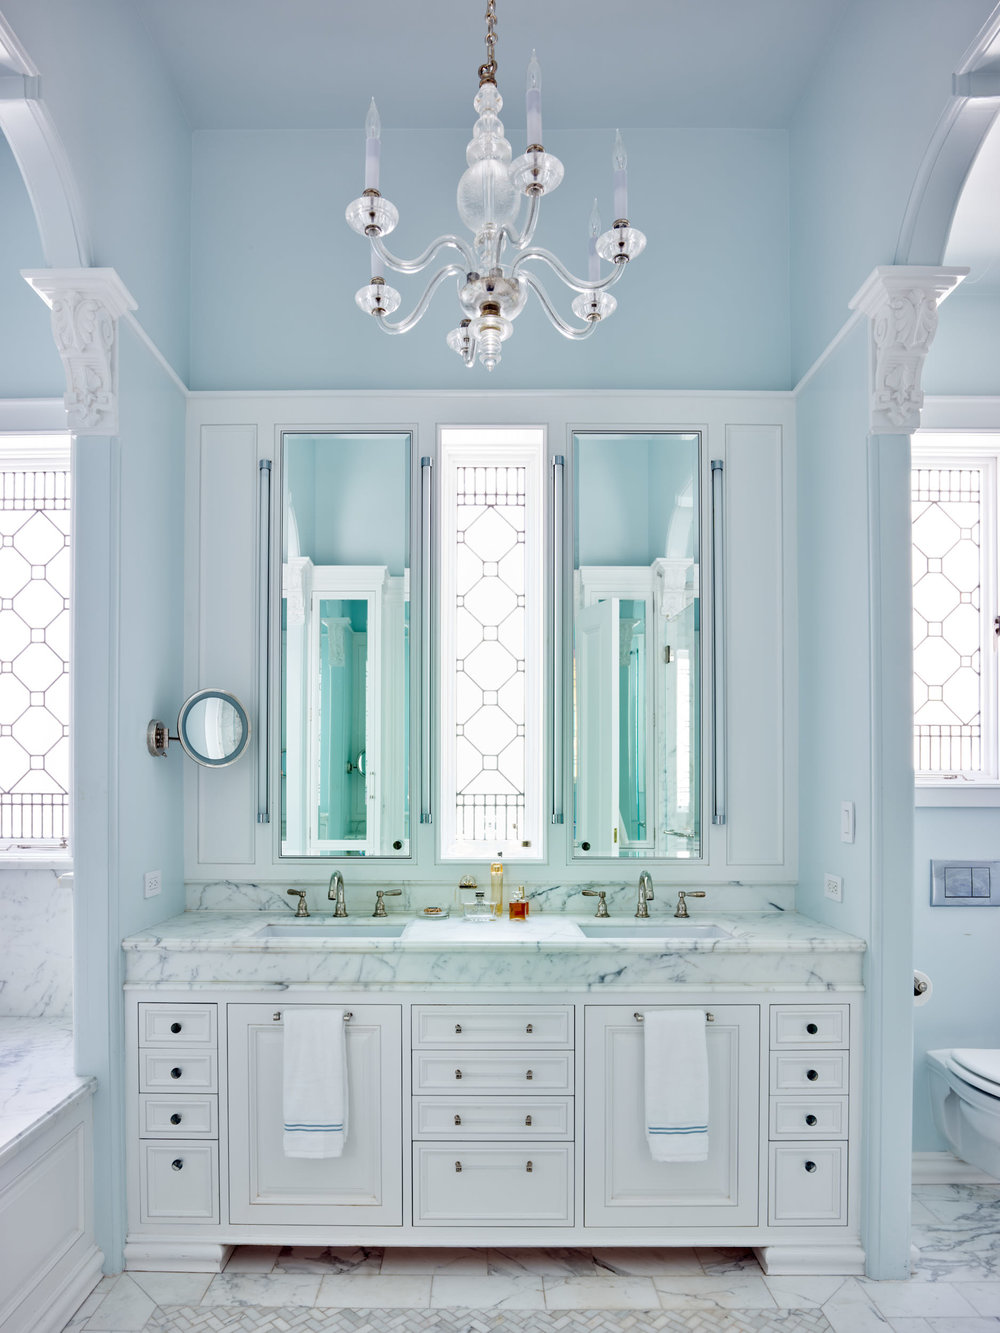 The restfully symmetrical new master bath featuring stained glass windows. Renovated historical house in San Francisco. Stained glass windows by Victoria Balva